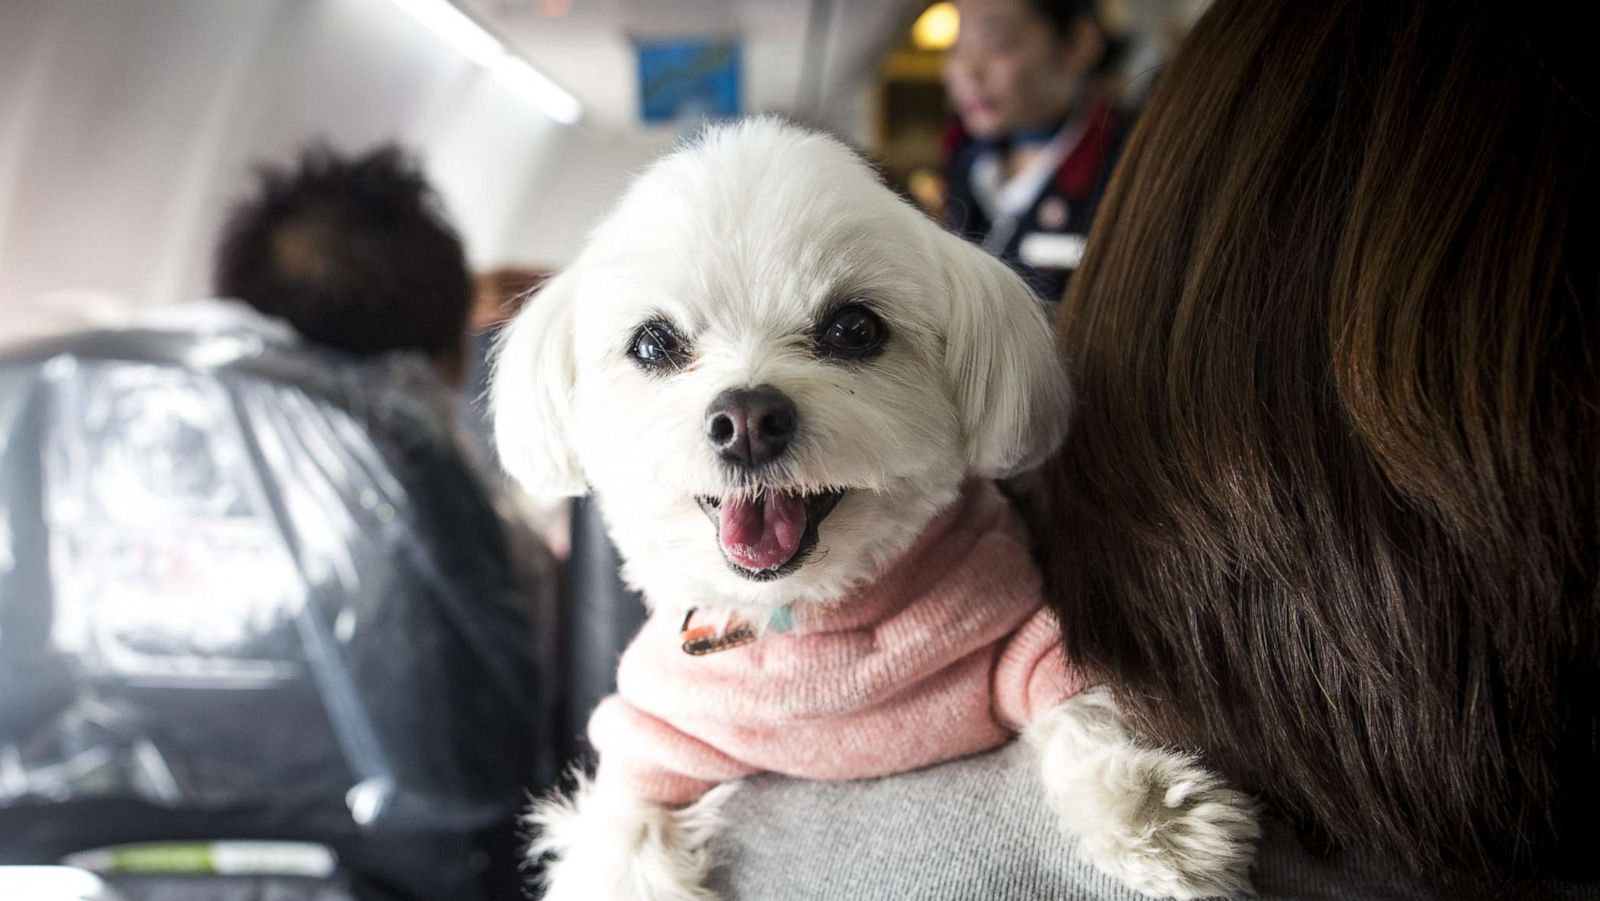 delta airlines animal travel policy